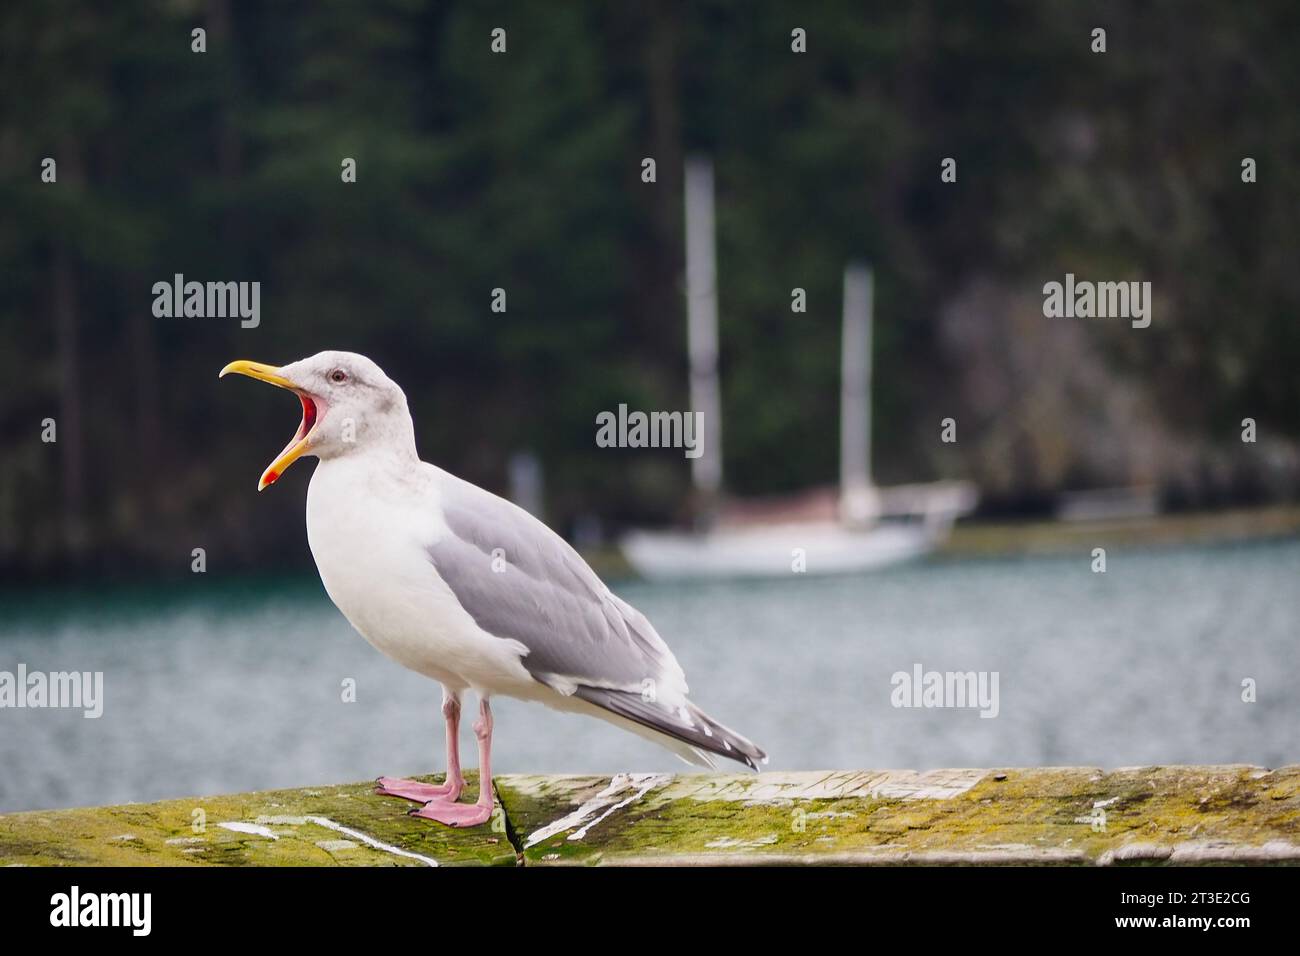 A squawking seagull in front of a private boat on the water in a forested cove near Coupeville on Whidbey Island, Washington. Stock Photo